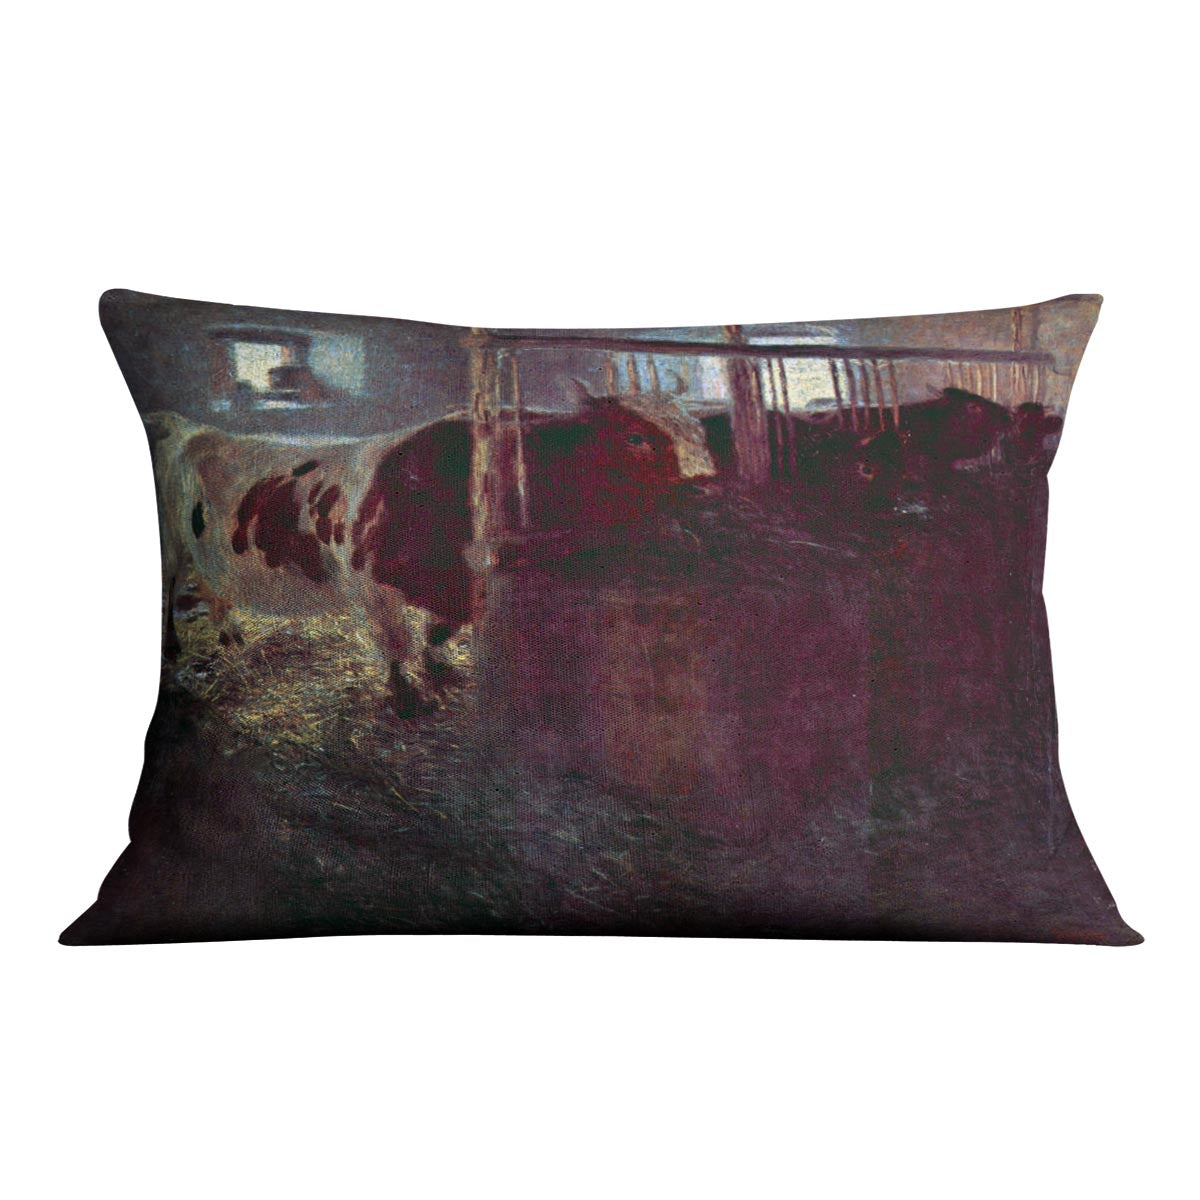 Cows in Stall by Klimt Cushion